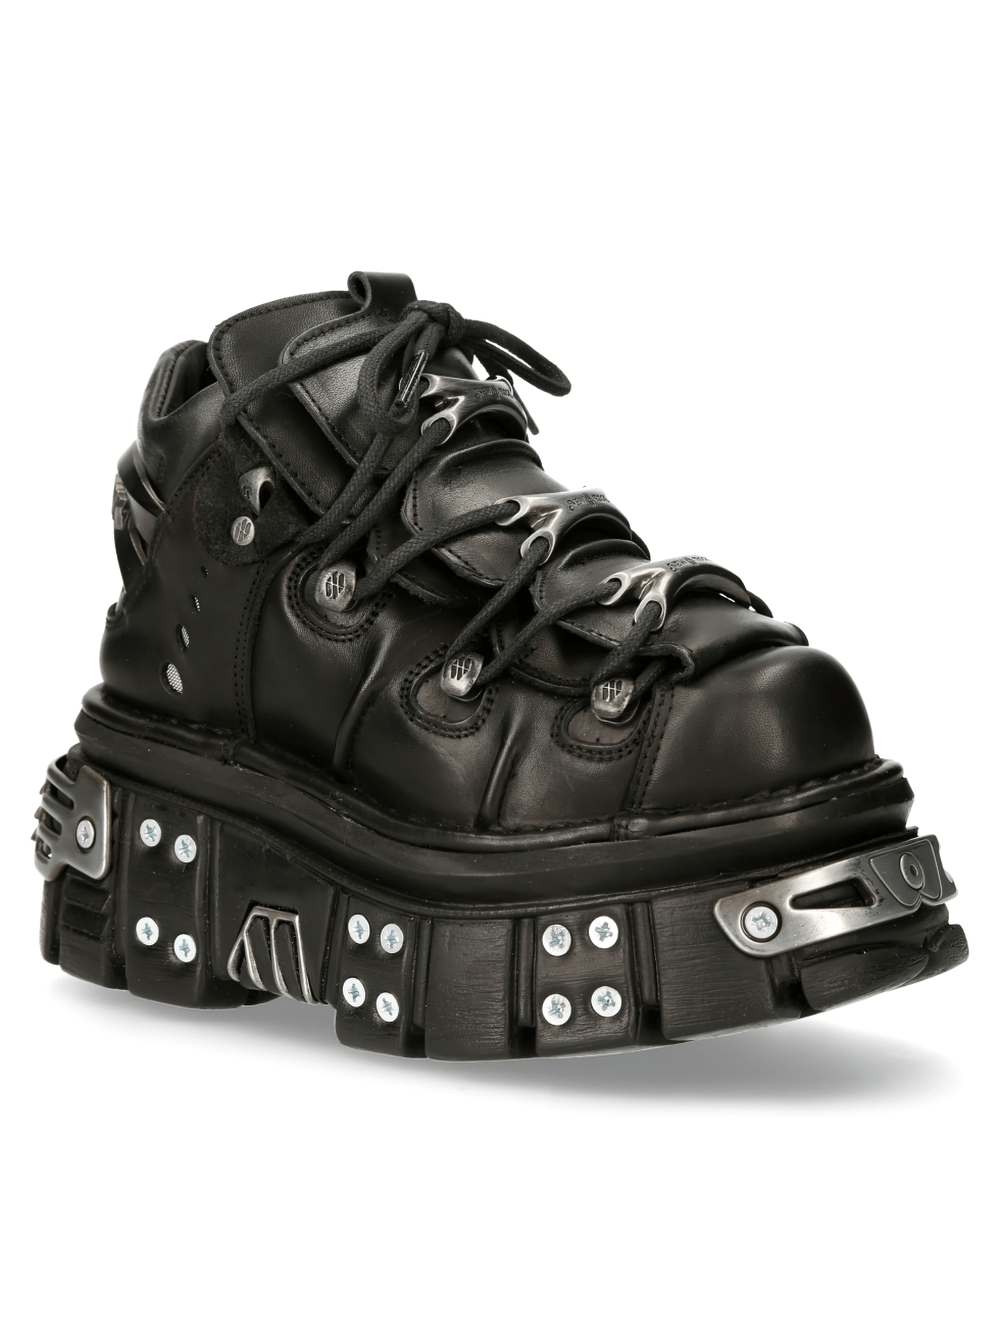 NEW ROCK Gothic Black Ankle Boots with Stud Details